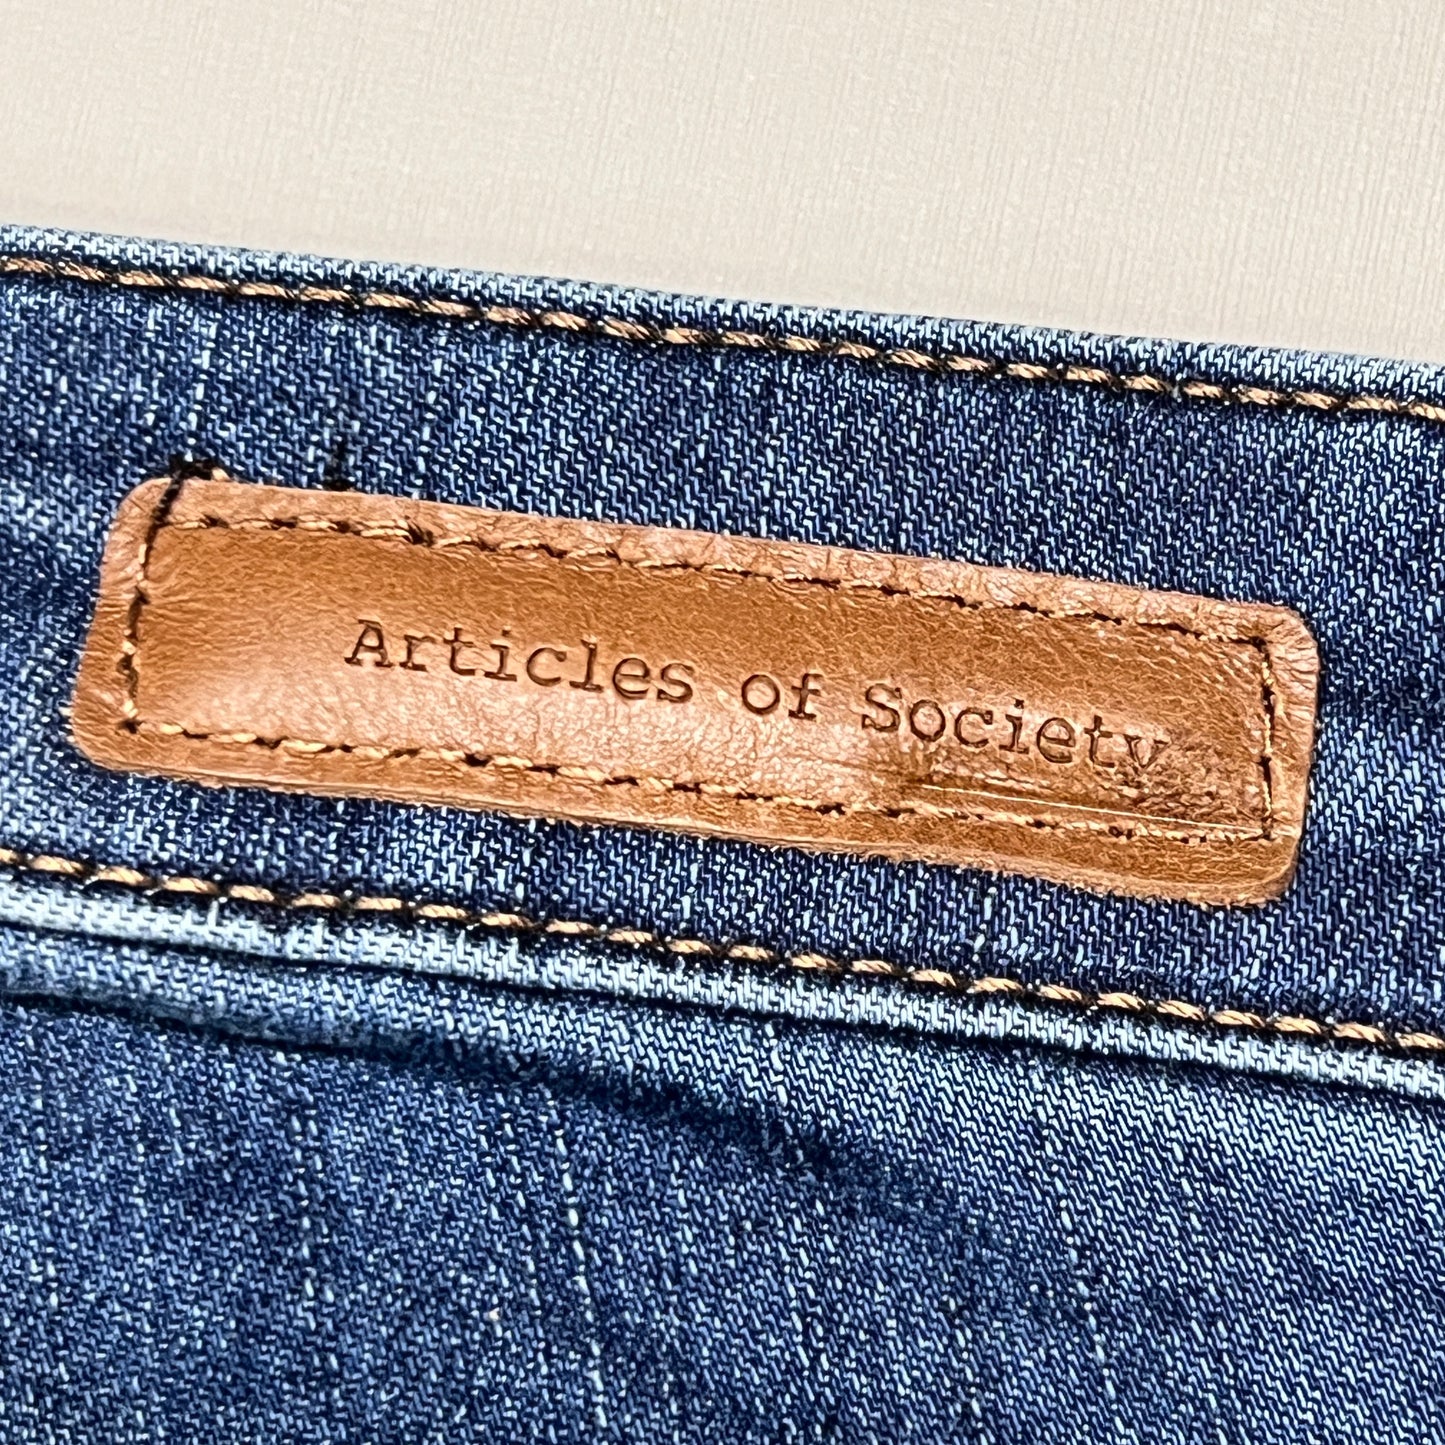 ARTICLES OF SOCIETY Hilo Ripped Denim Jeans Women's Sz 27 Blue 5350PLV-706 (New)